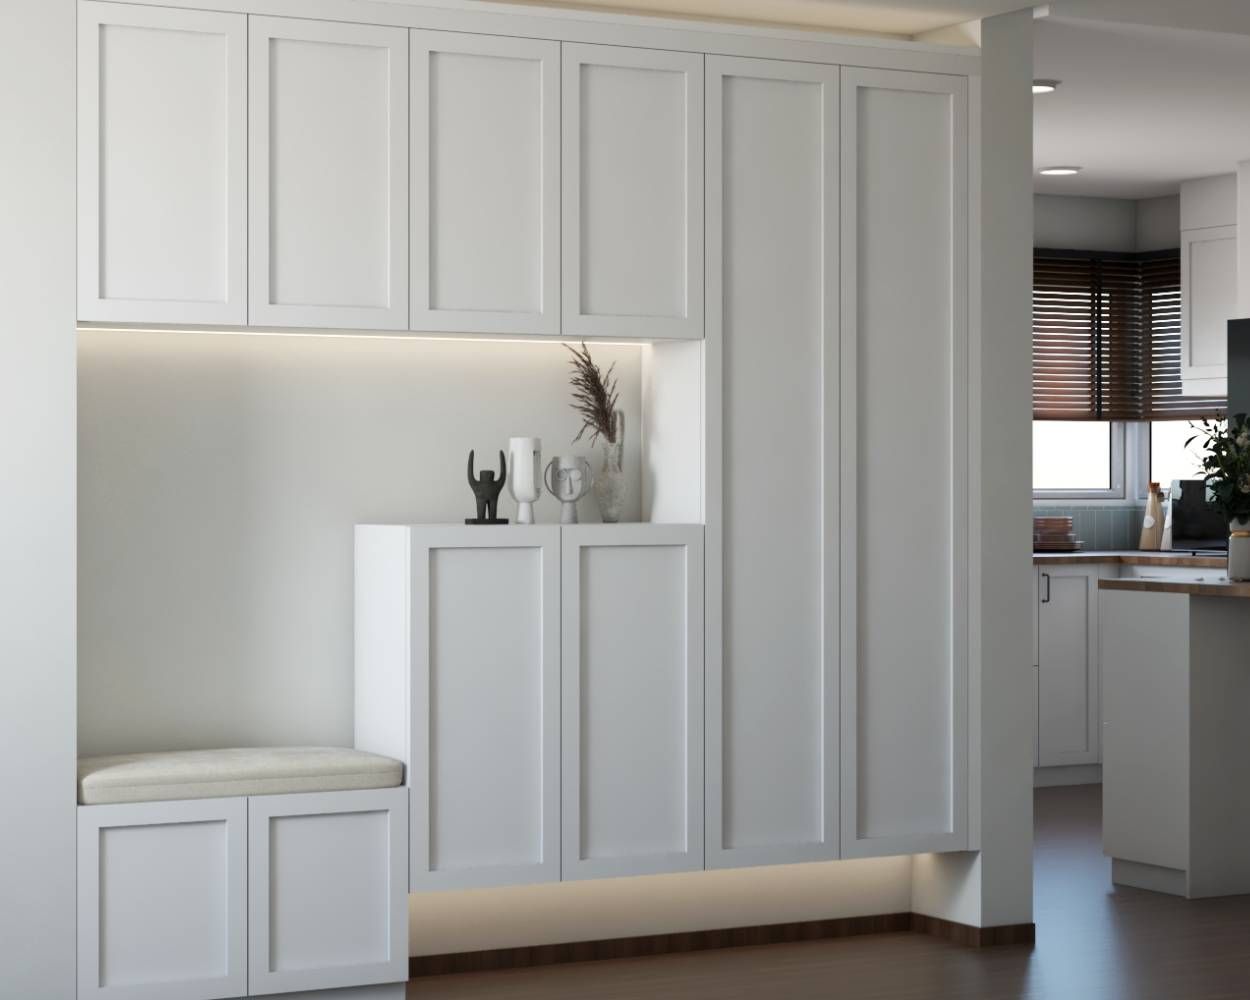 Classic White Foyer Design With Integrated Seater And Storage Unit